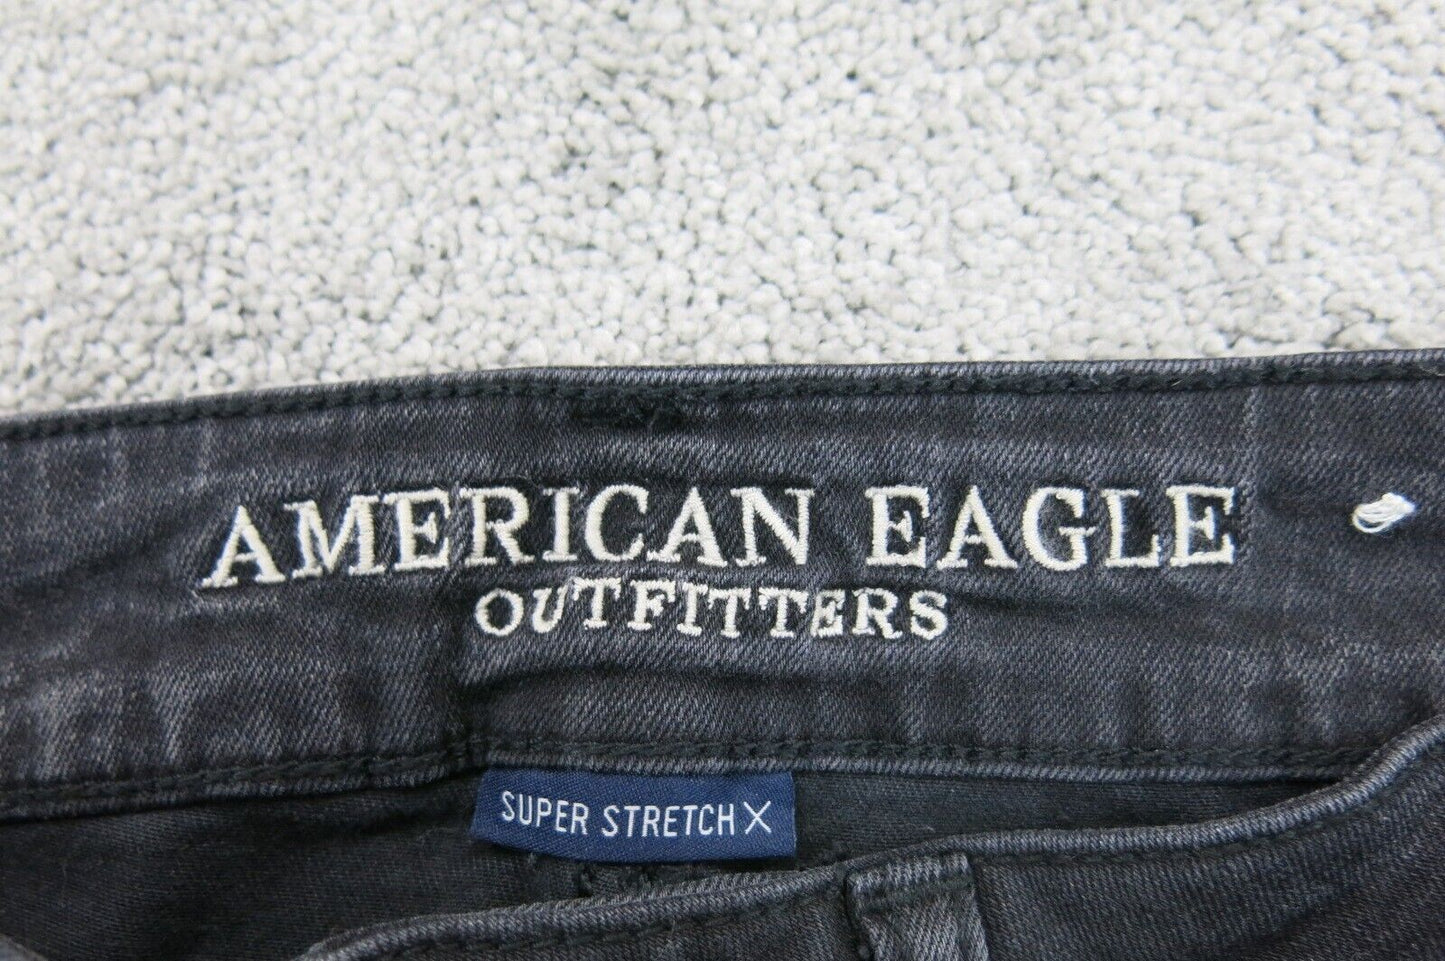 American Eagle Womens Cut Off Jeans Shorts Super Stretch Distressed Black Size 4